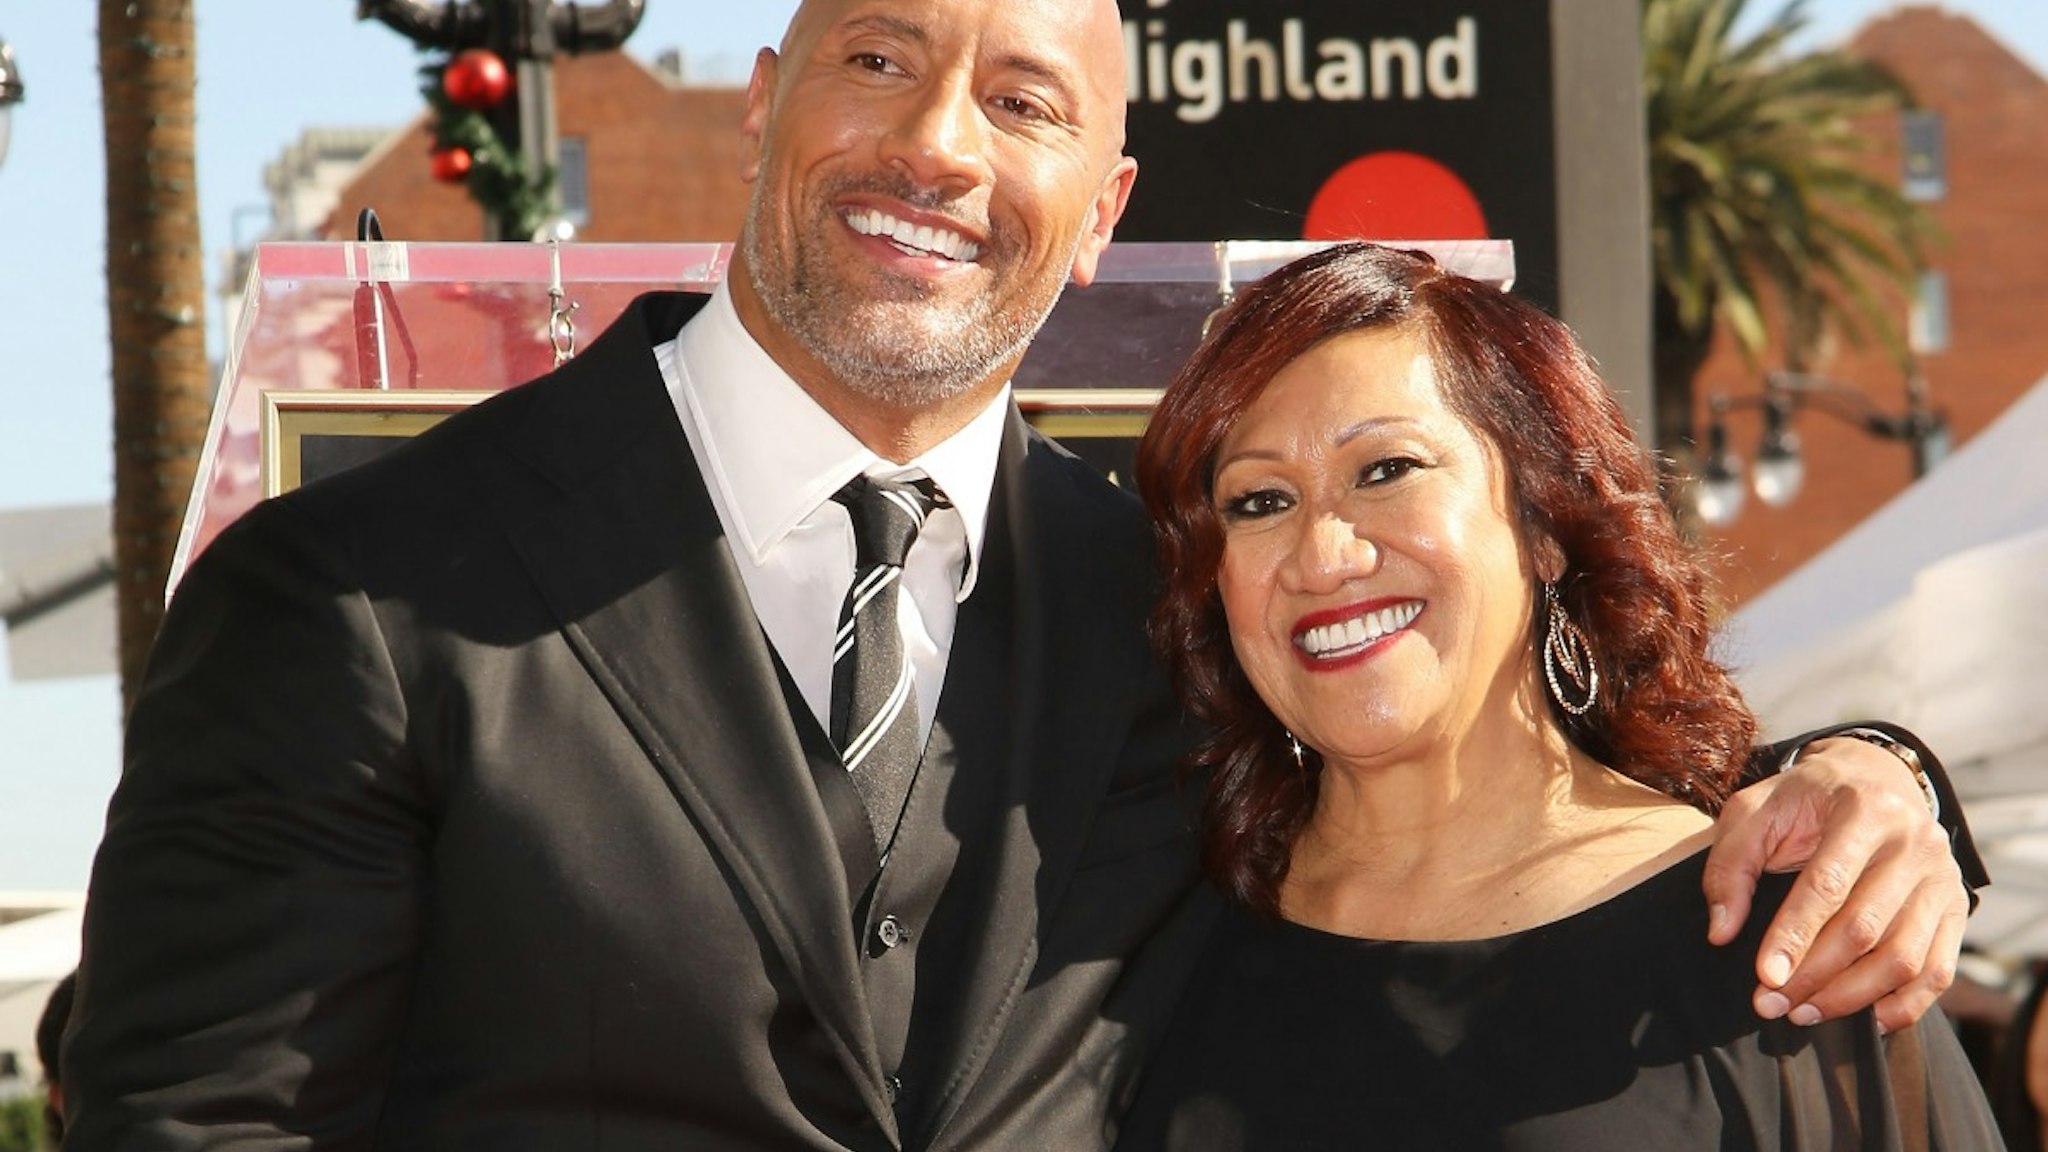 Dwayne Johnson and his mom, Ata Johnson attend the ceremony honoring Dwayne Johnson with a Star on The Hollywood Walk of Fame held on December 13, 2017 in Hollywood, California.